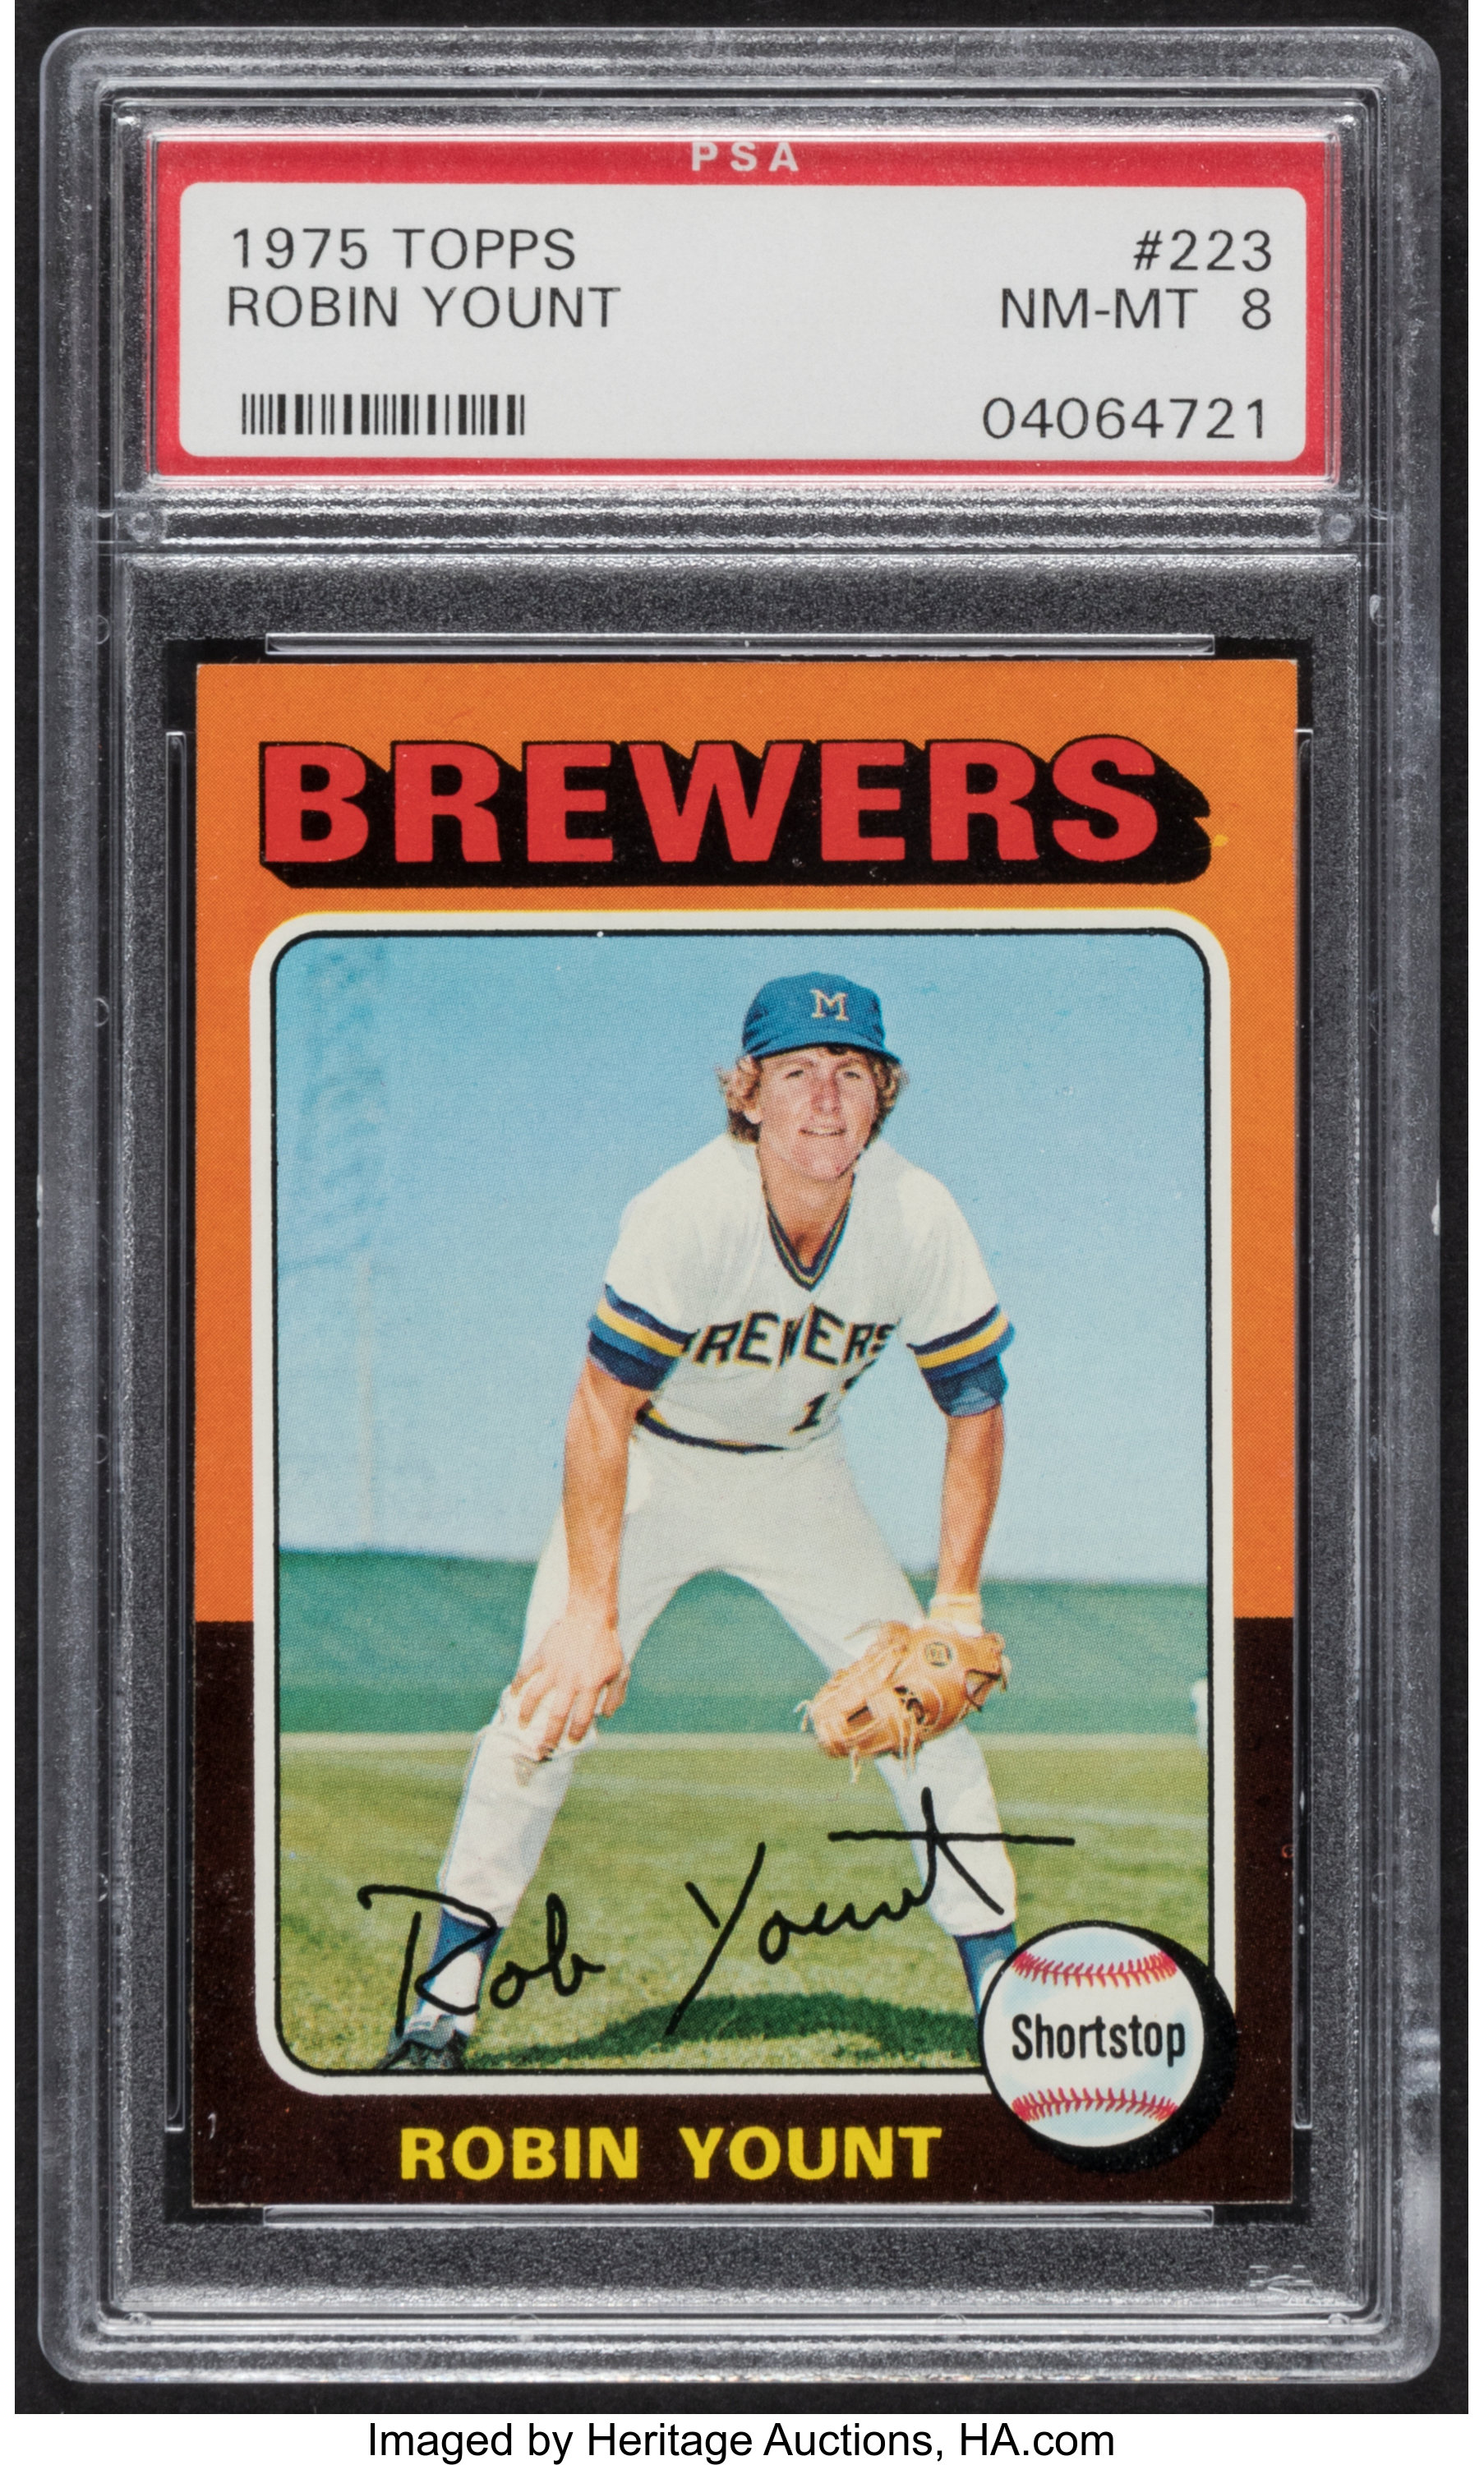 Robin Yount Autographed 1975 Topps Rookie Card #223 Milwaukee